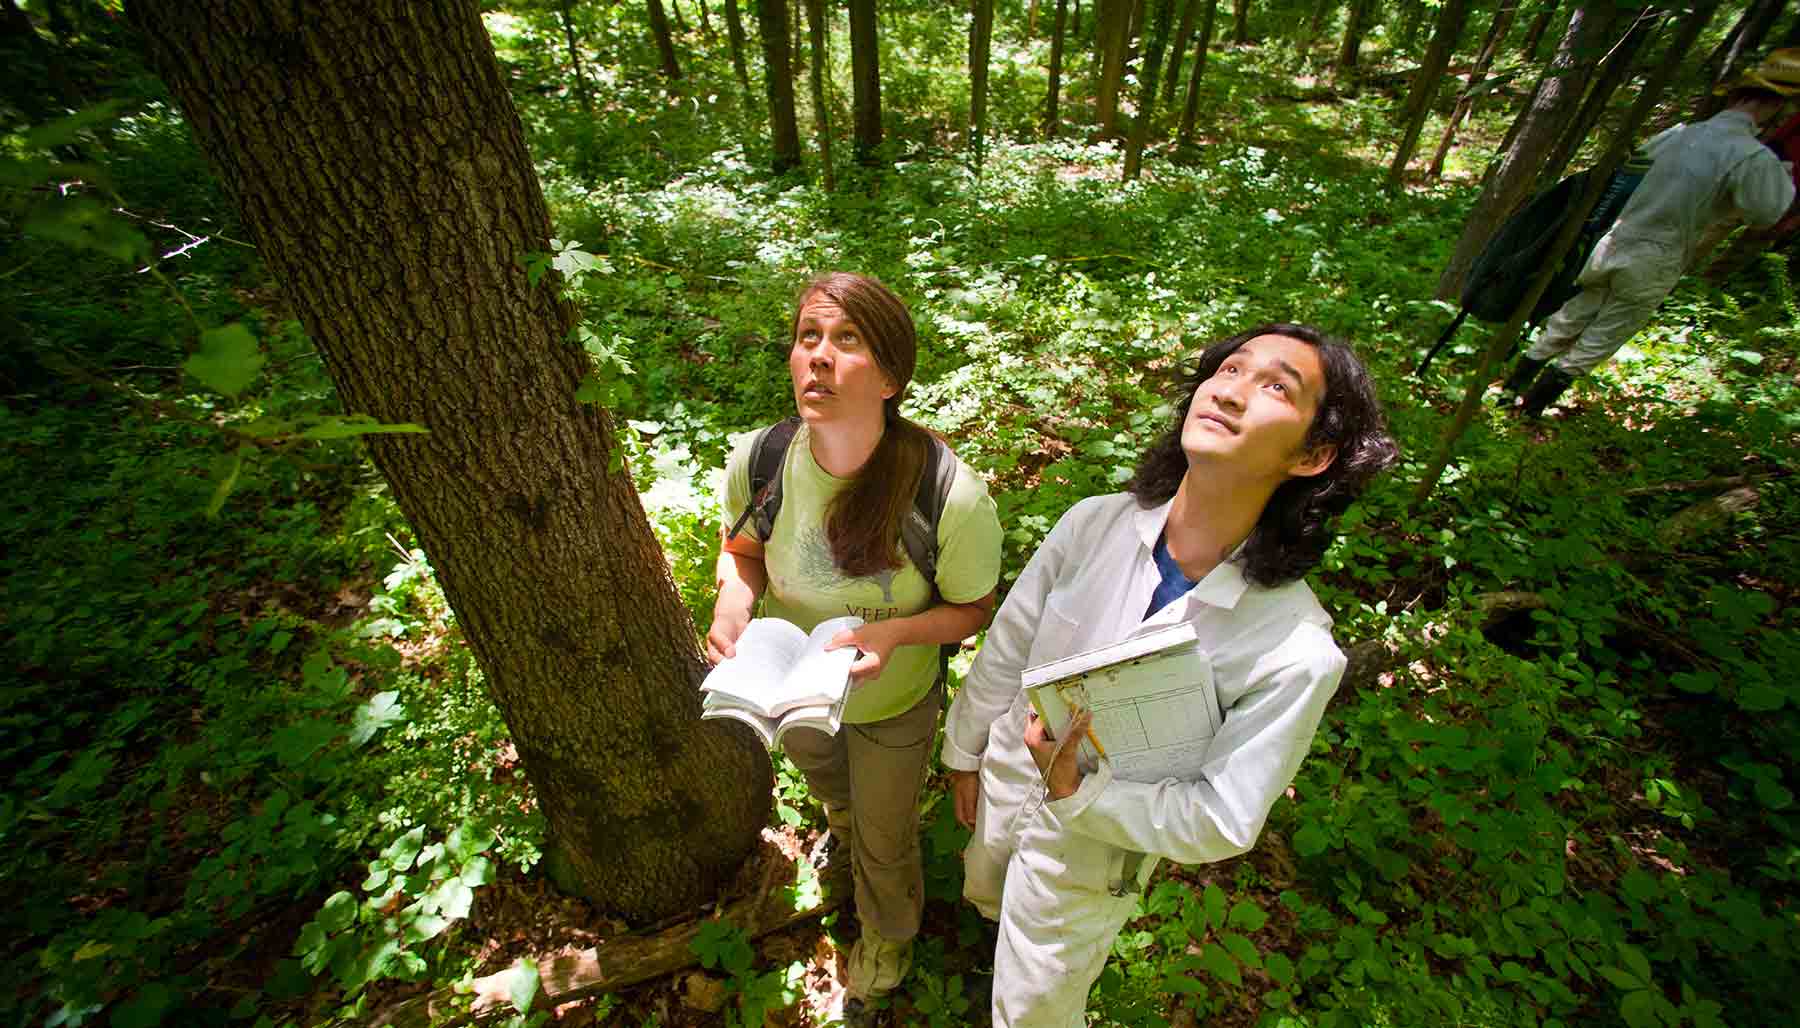 A faculty member and student stand in the woods looking up at a tree trunk